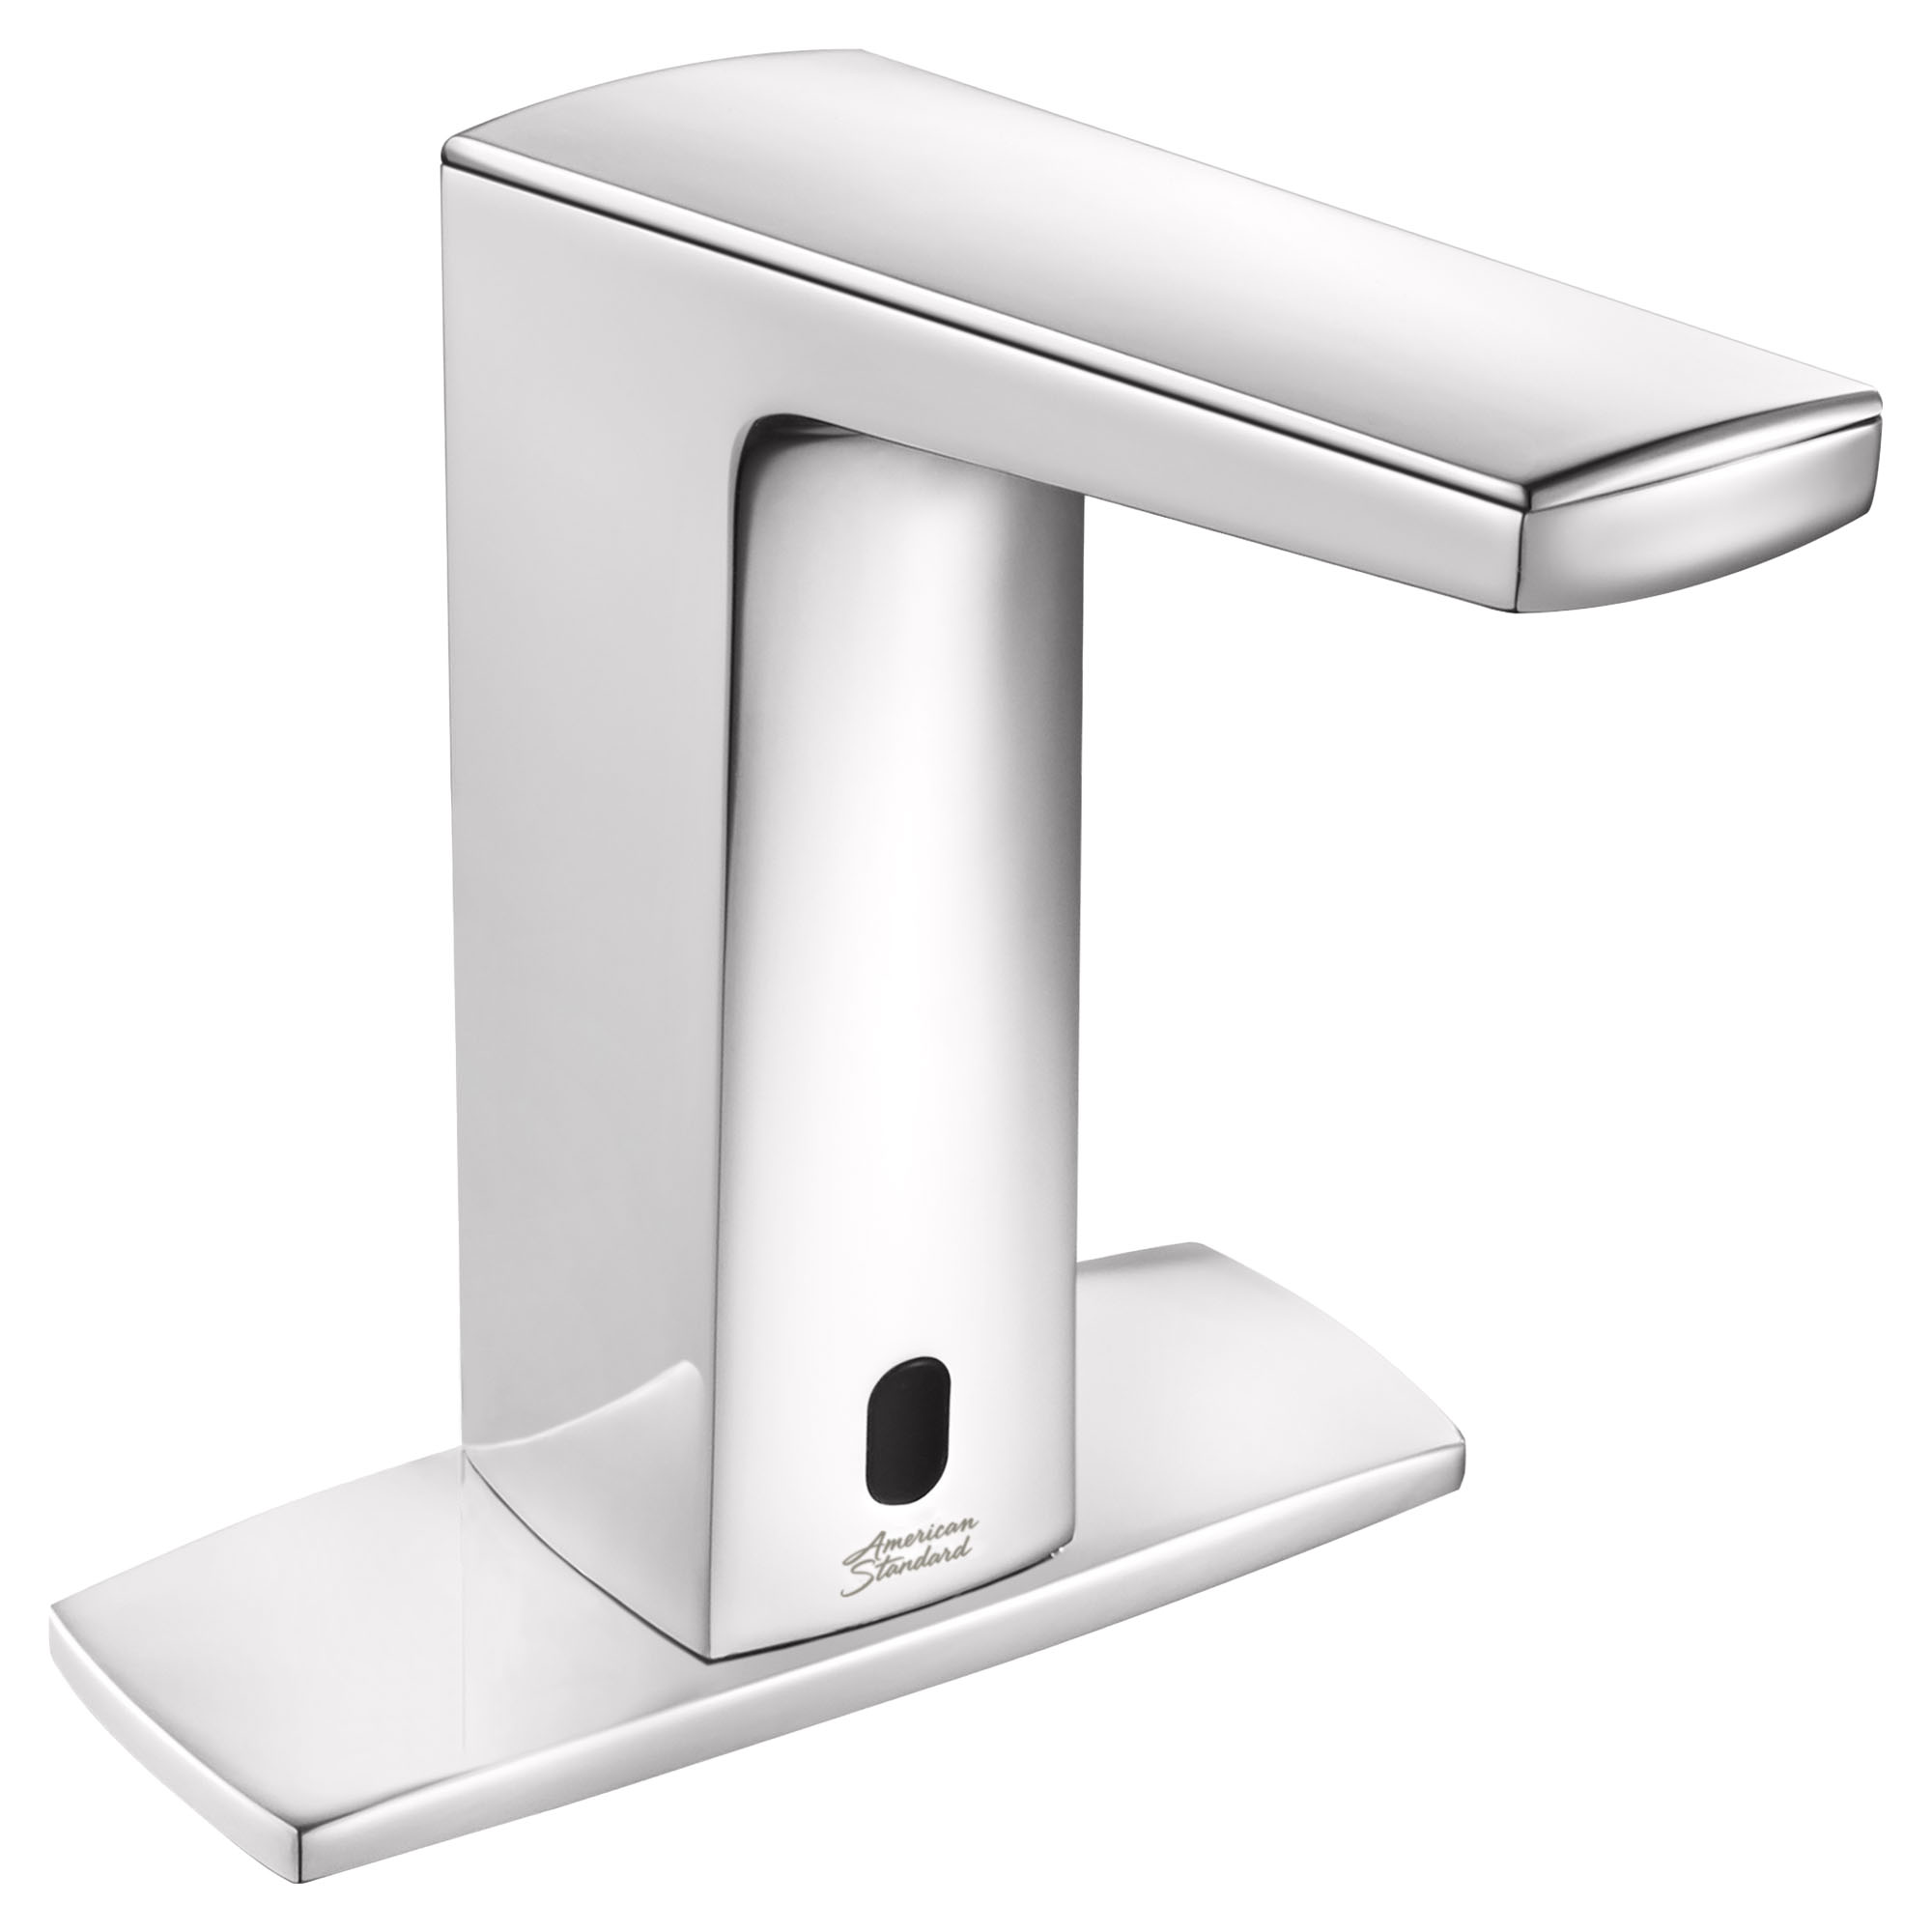 Paradigm™ Selectronic™ Touchless Faucet, Base Model, 0.5 gpm/1.9 Lpm